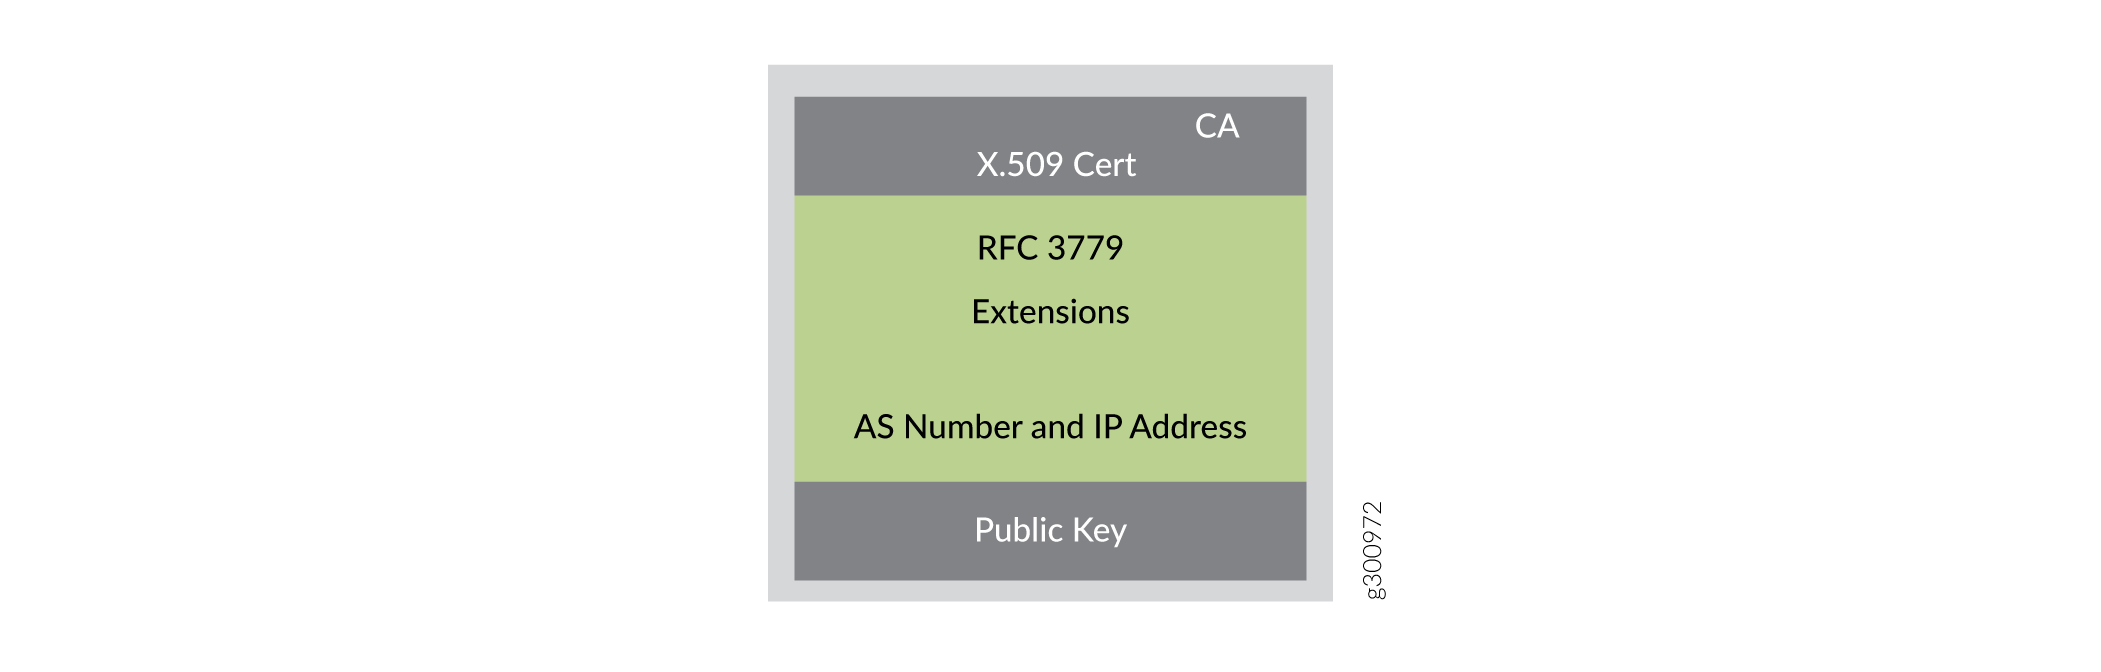 The X.509
Certificate for RPKI